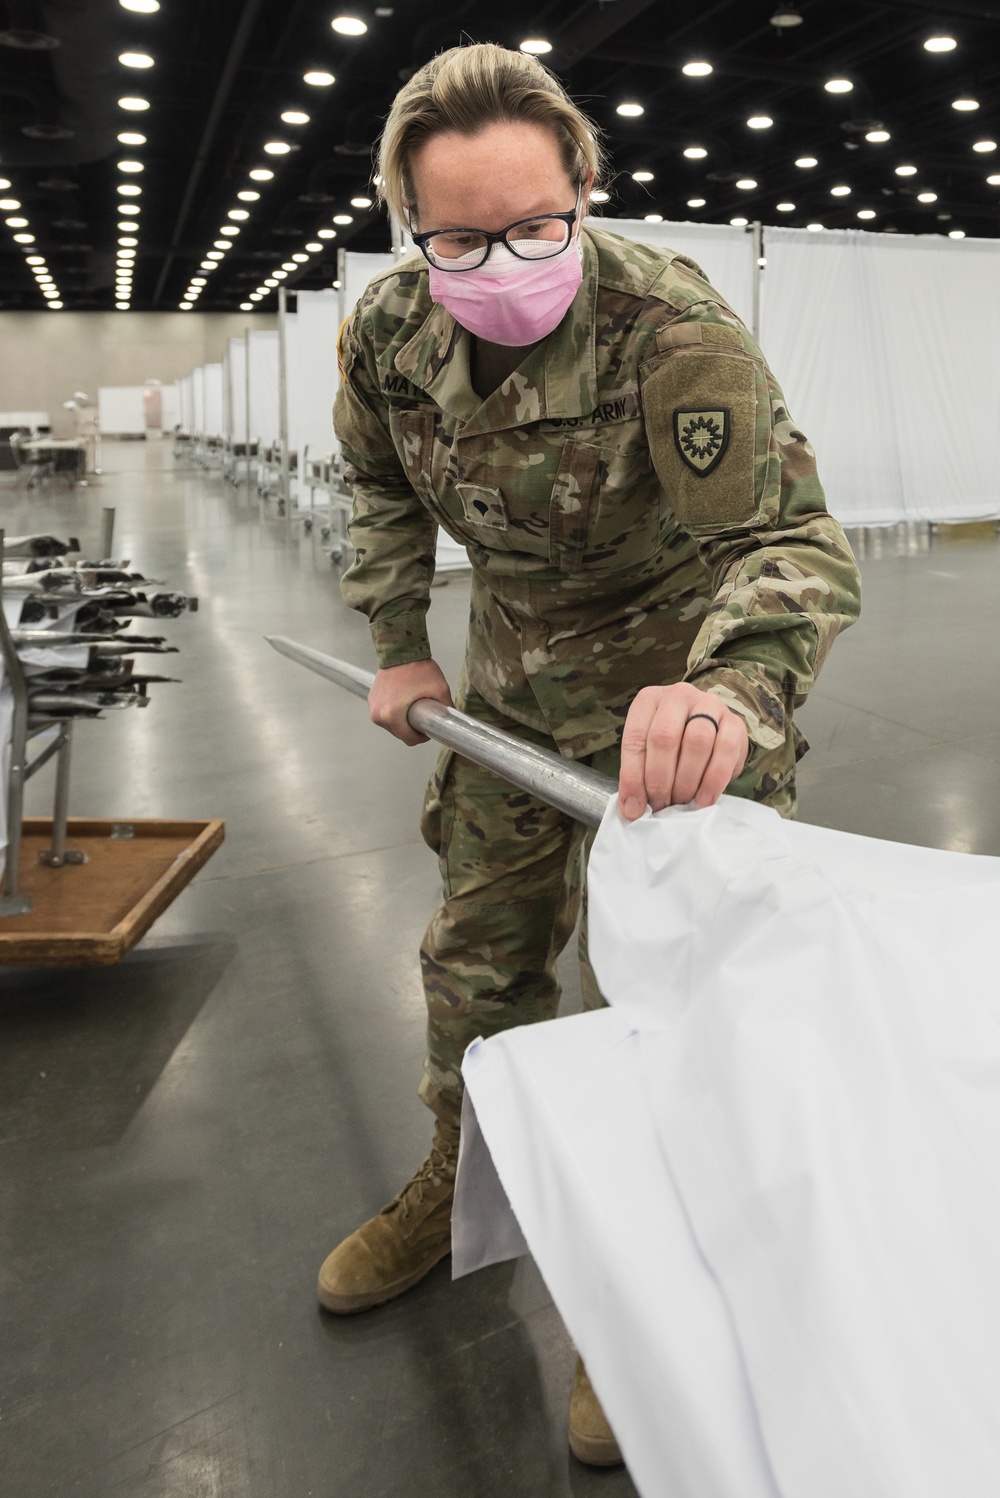 Ky. Guard sets up Alternate Care Facility for COVID-19